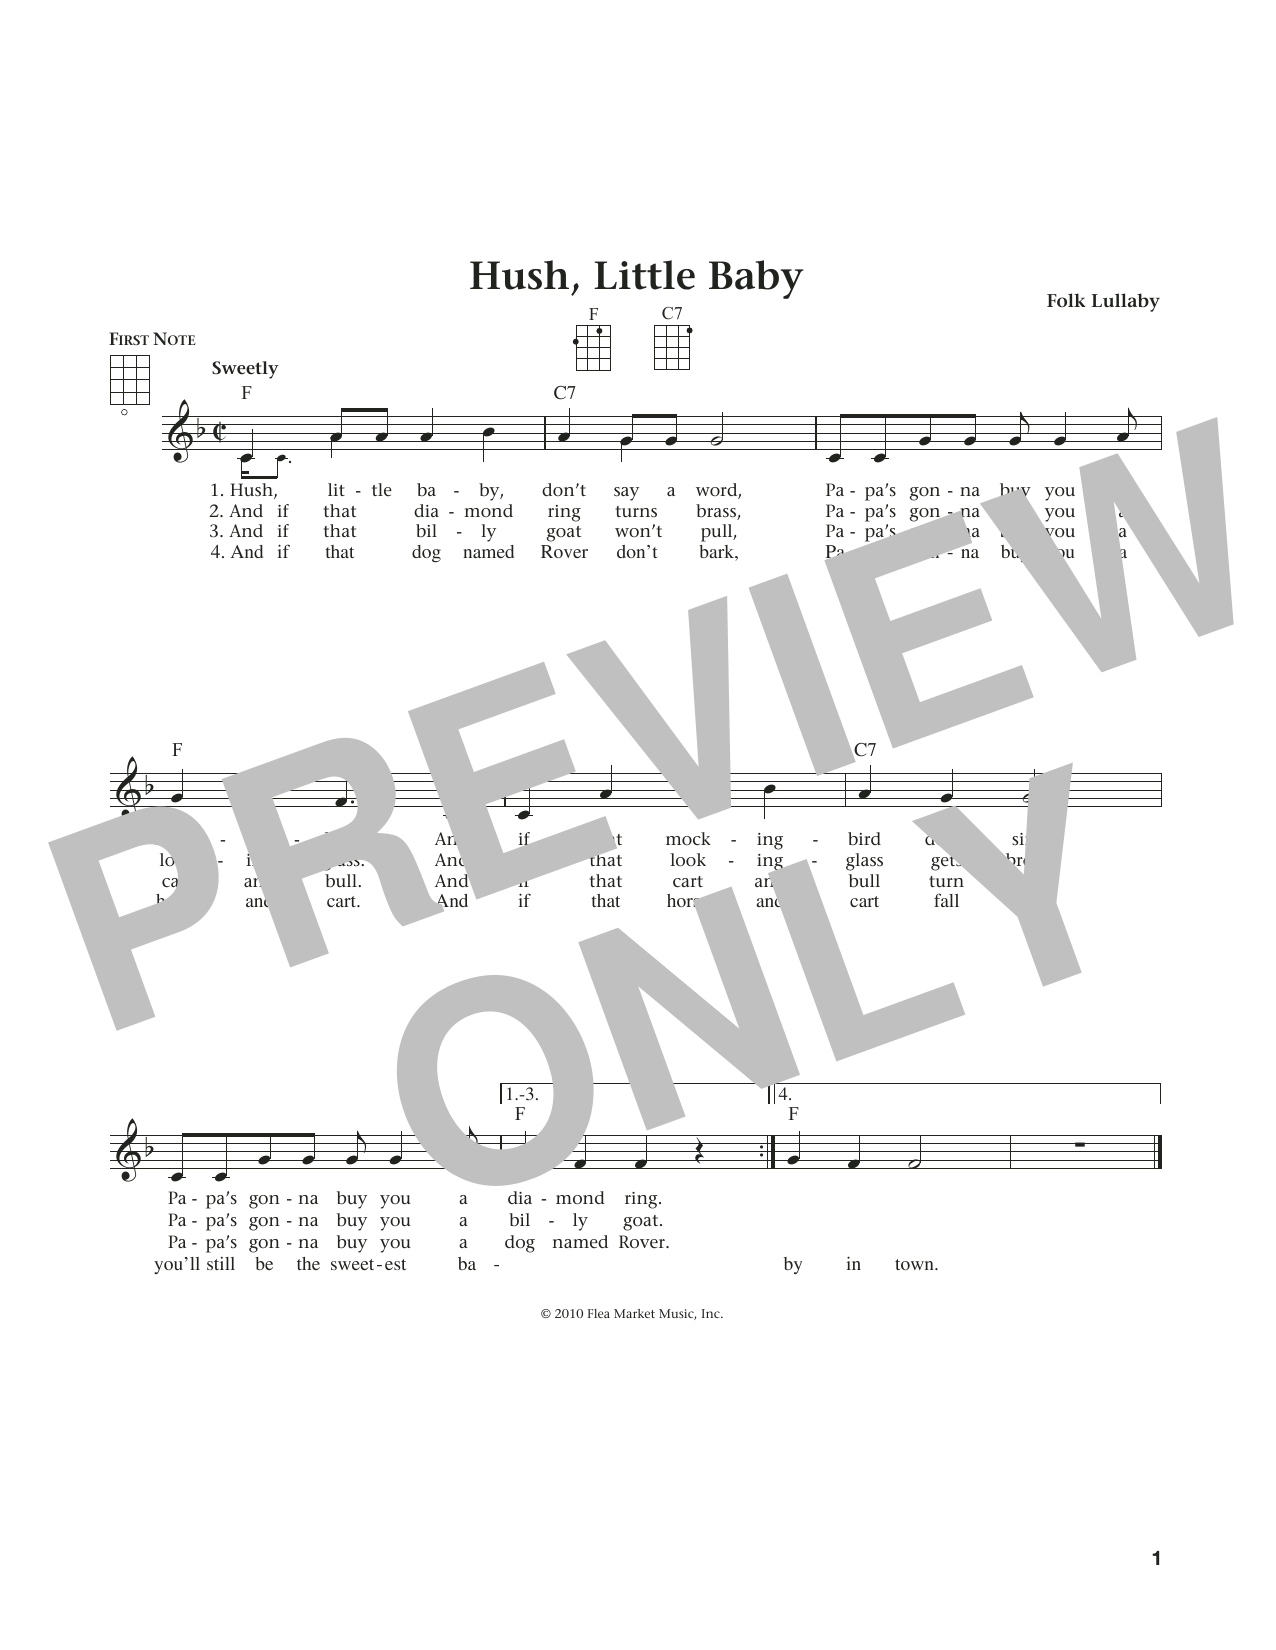 Download Carolina Folk Lullaby Hush, Little Baby (from The Daily Ukule Sheet Music